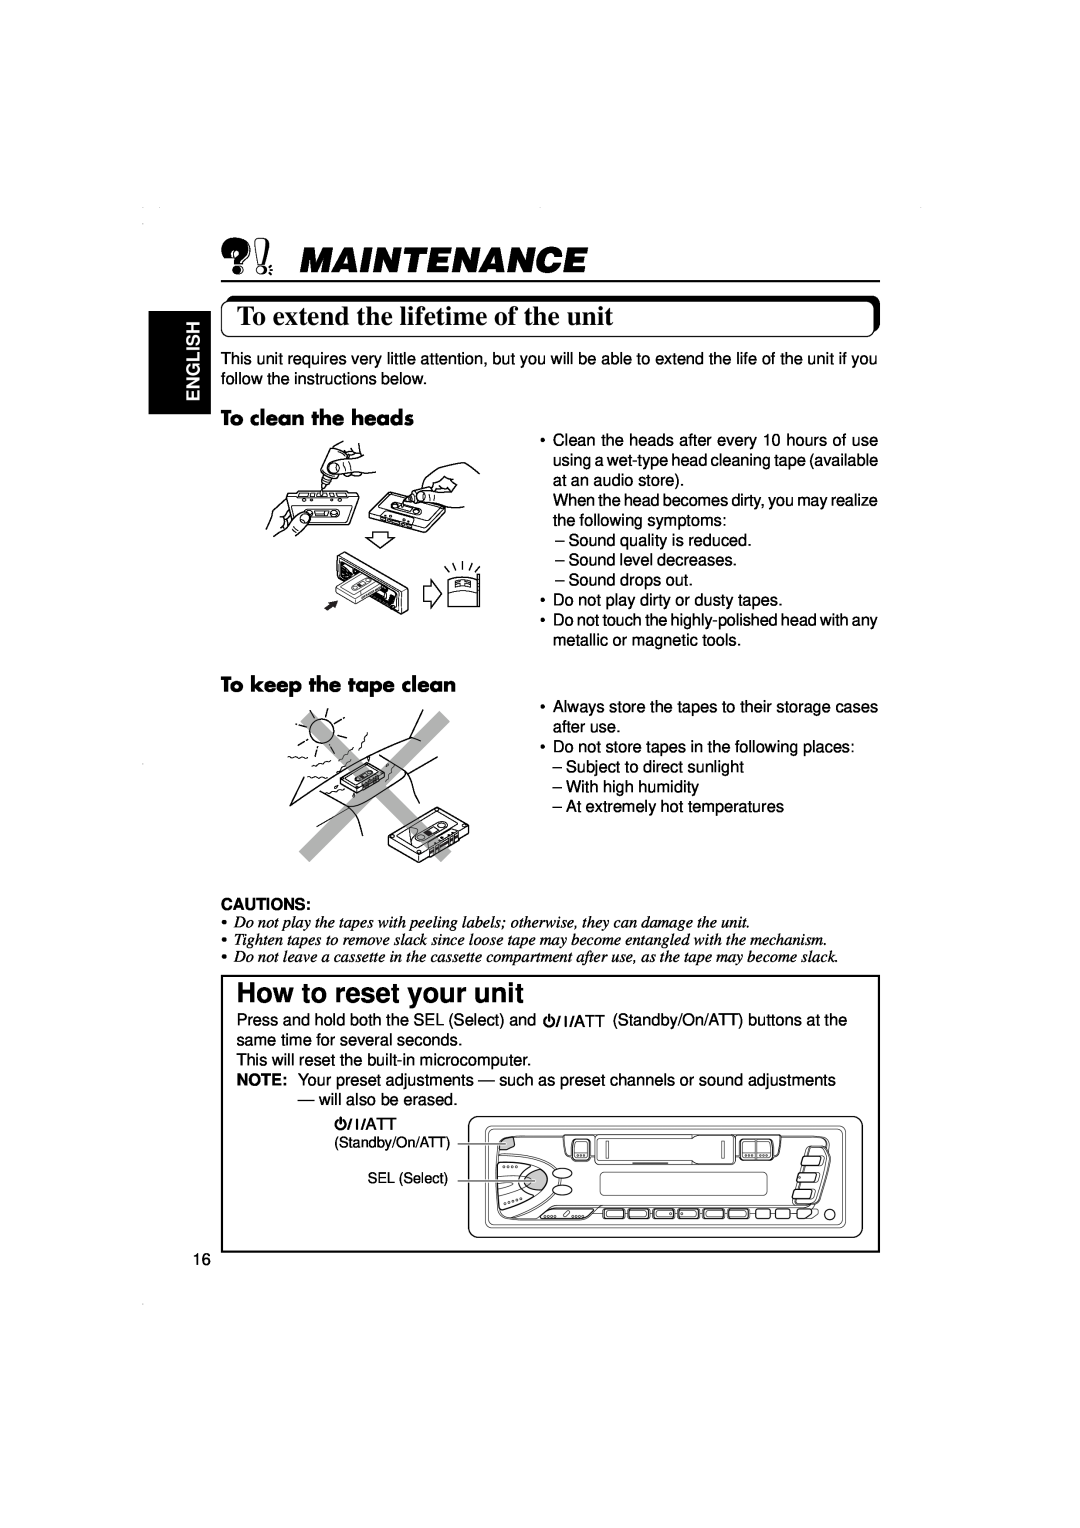 JVC KS-F315EE manual Maintenance, To extend the lifetime of the unit, How to reset your unit, To clean the heads, English 